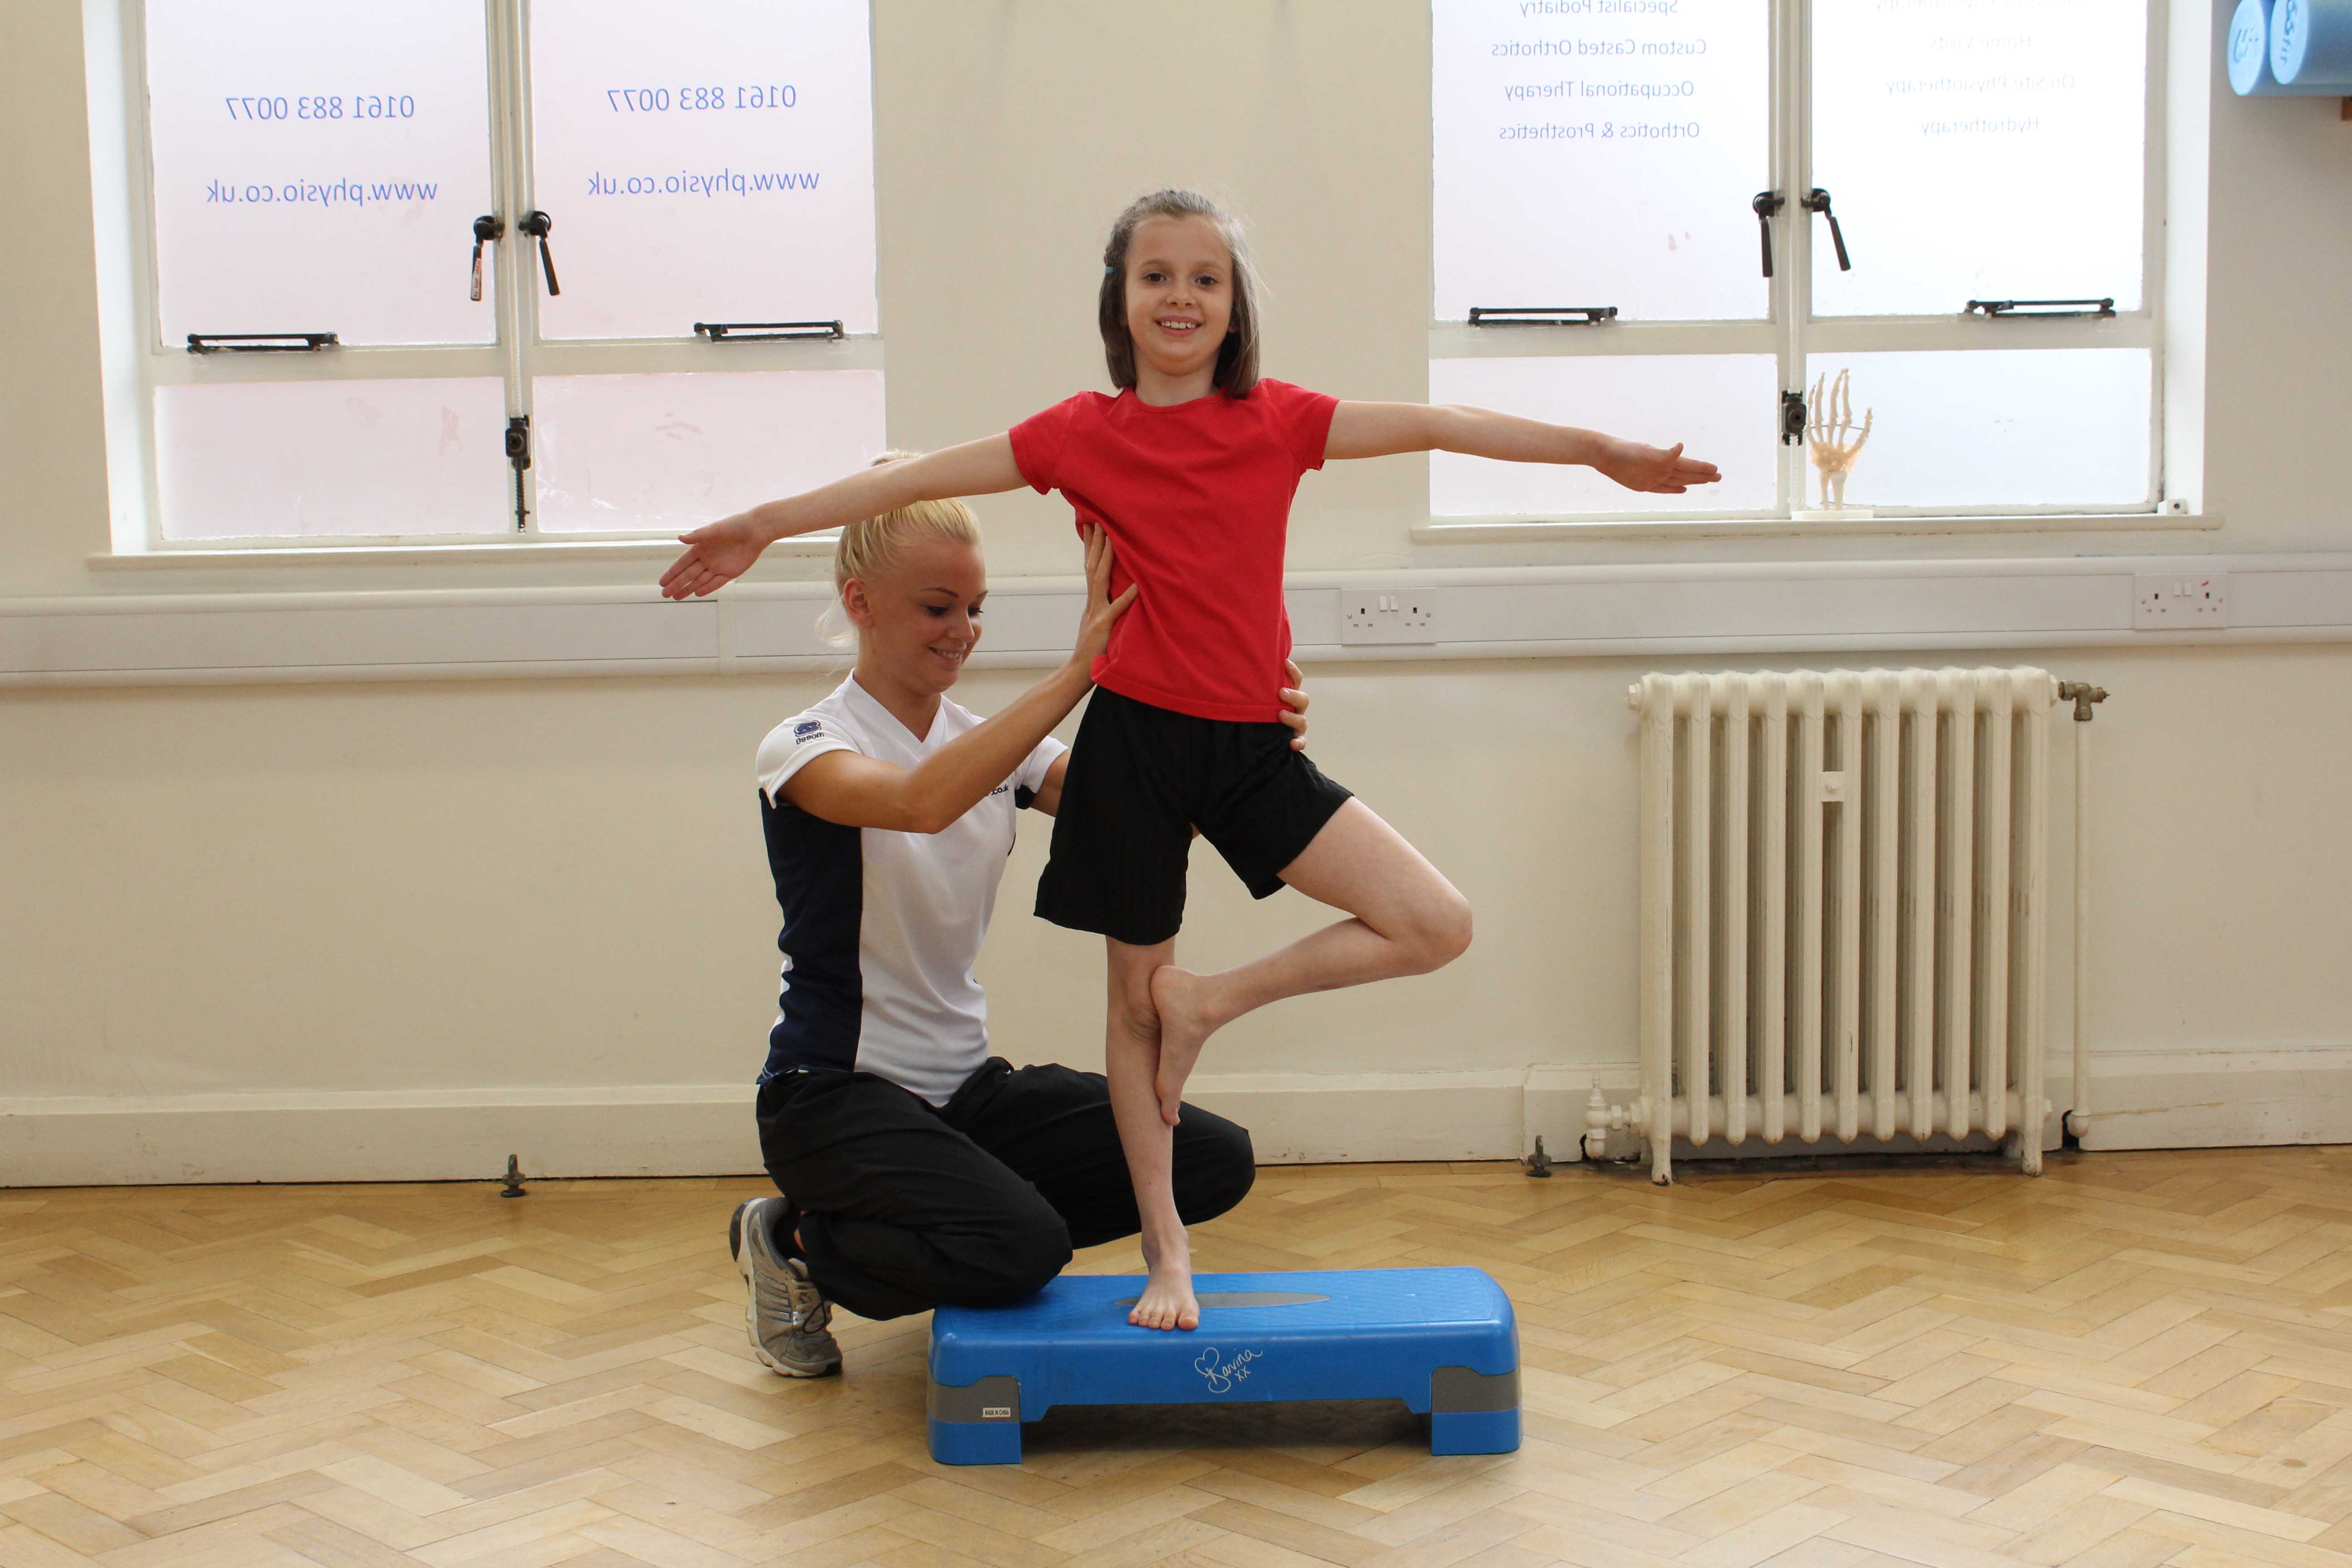 Toning and stability exercises supervised by specialist physiotherapist to manage hypermobility